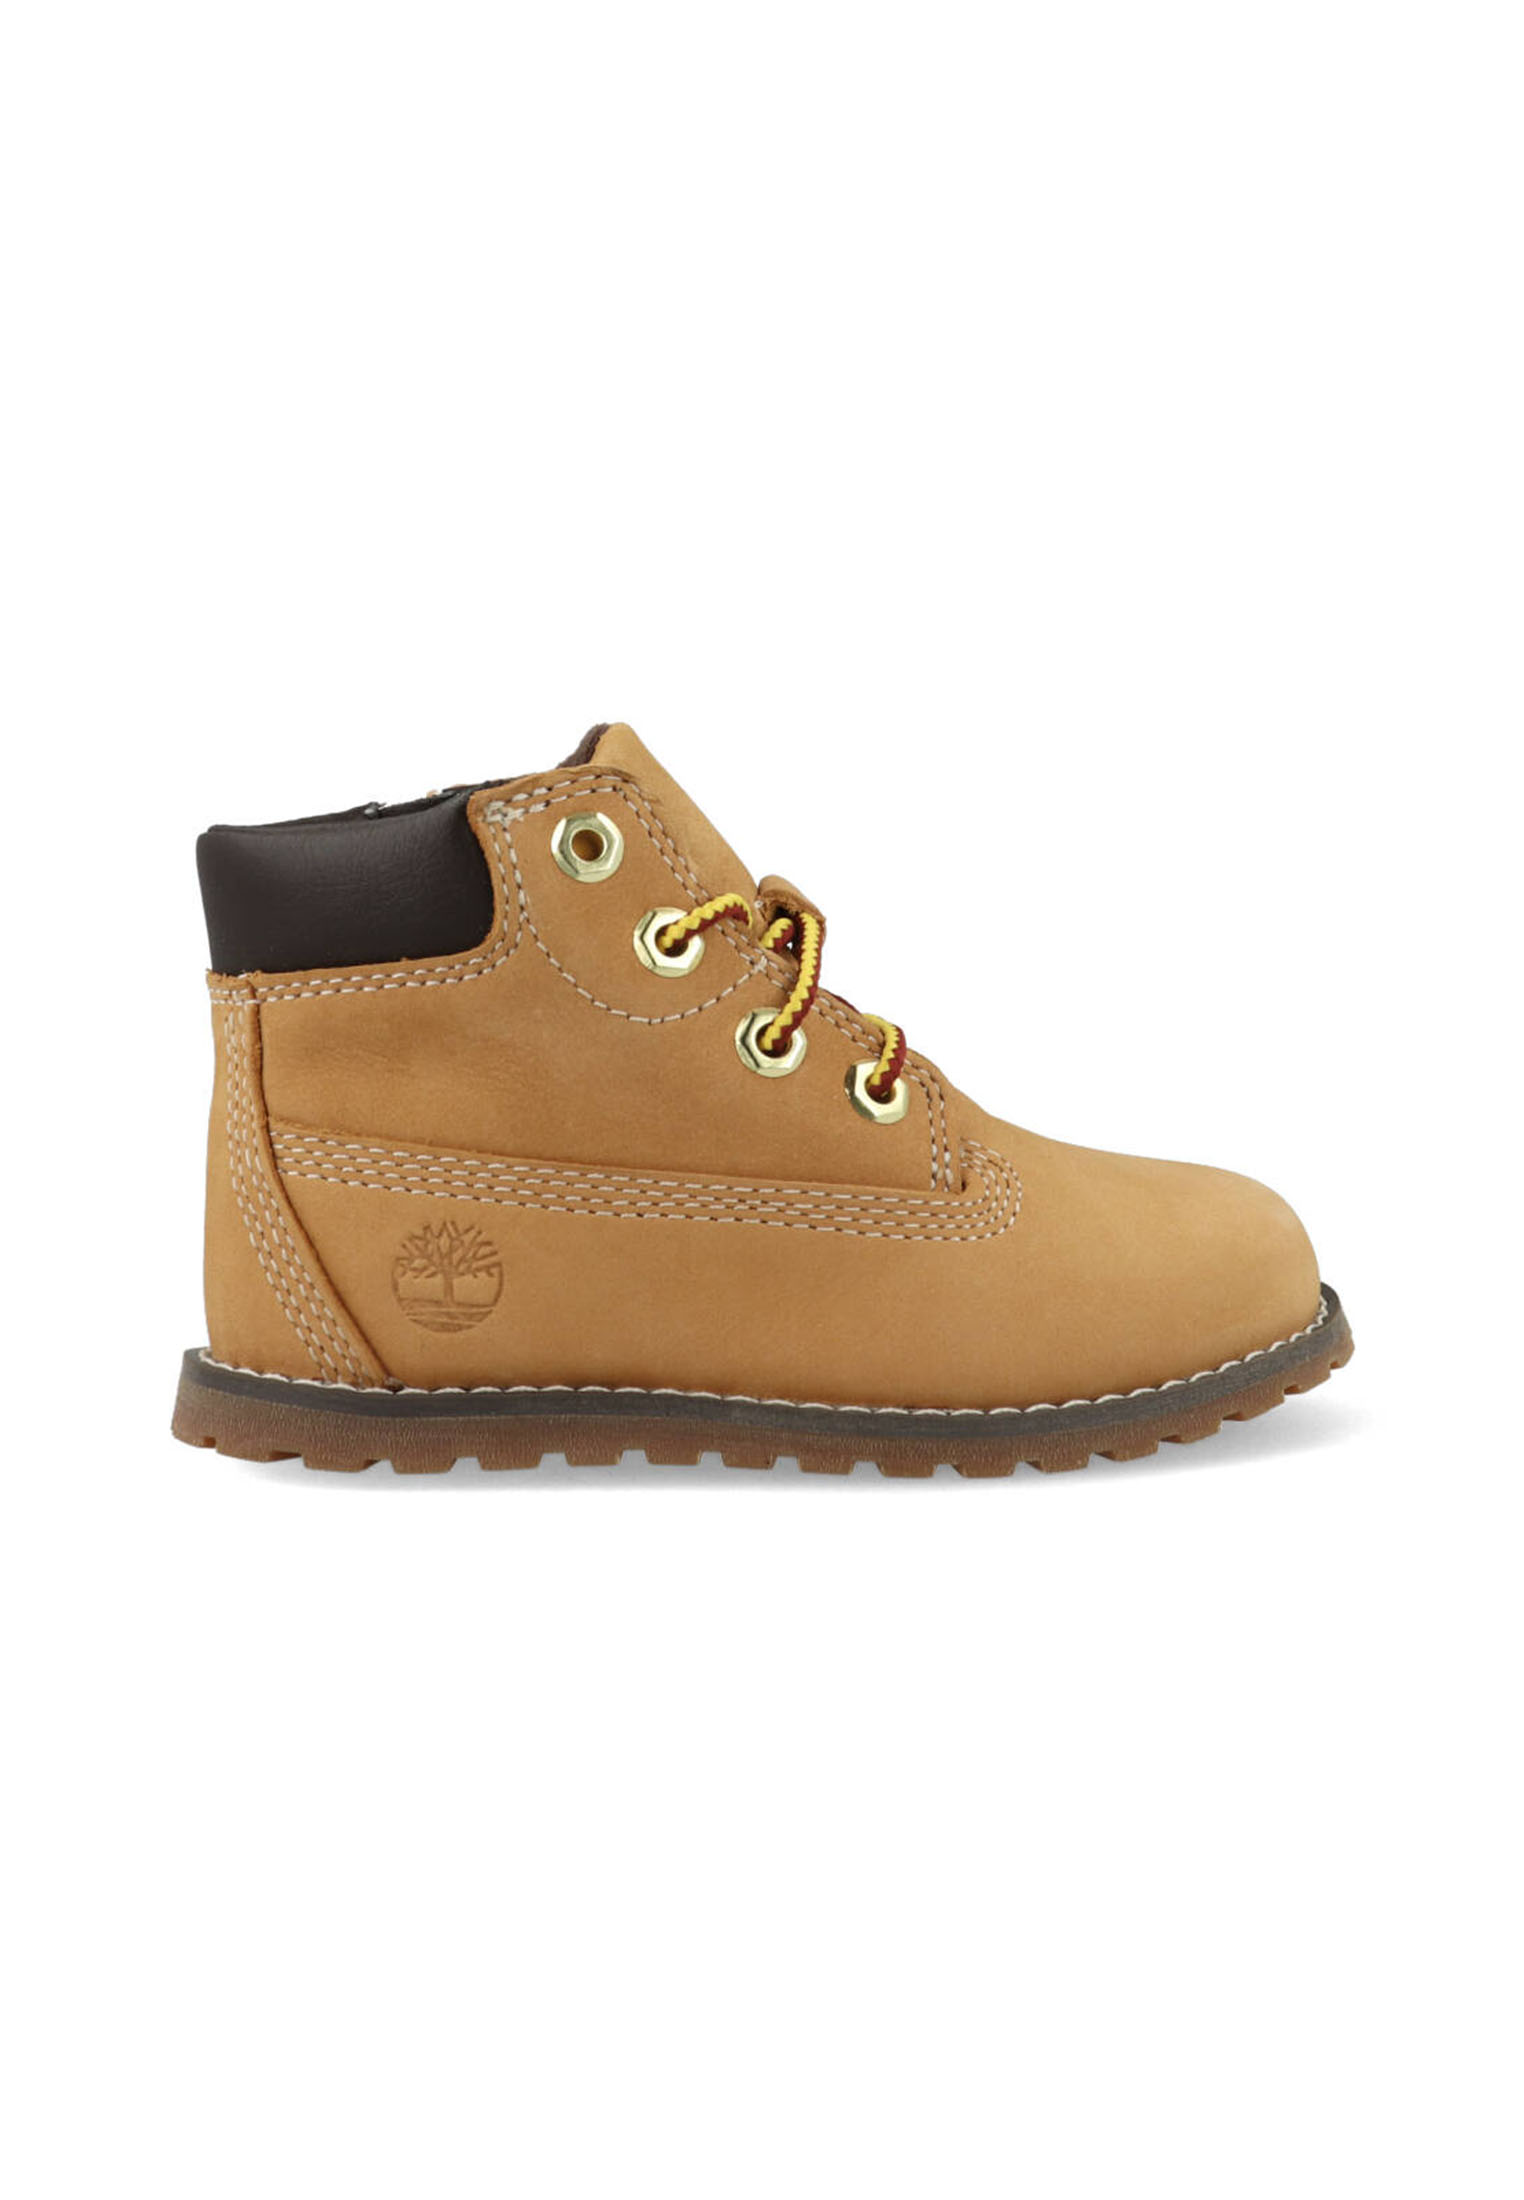 Timberland Pokey Pine 6-inch Boots A125Q Bruin-26 maat 26